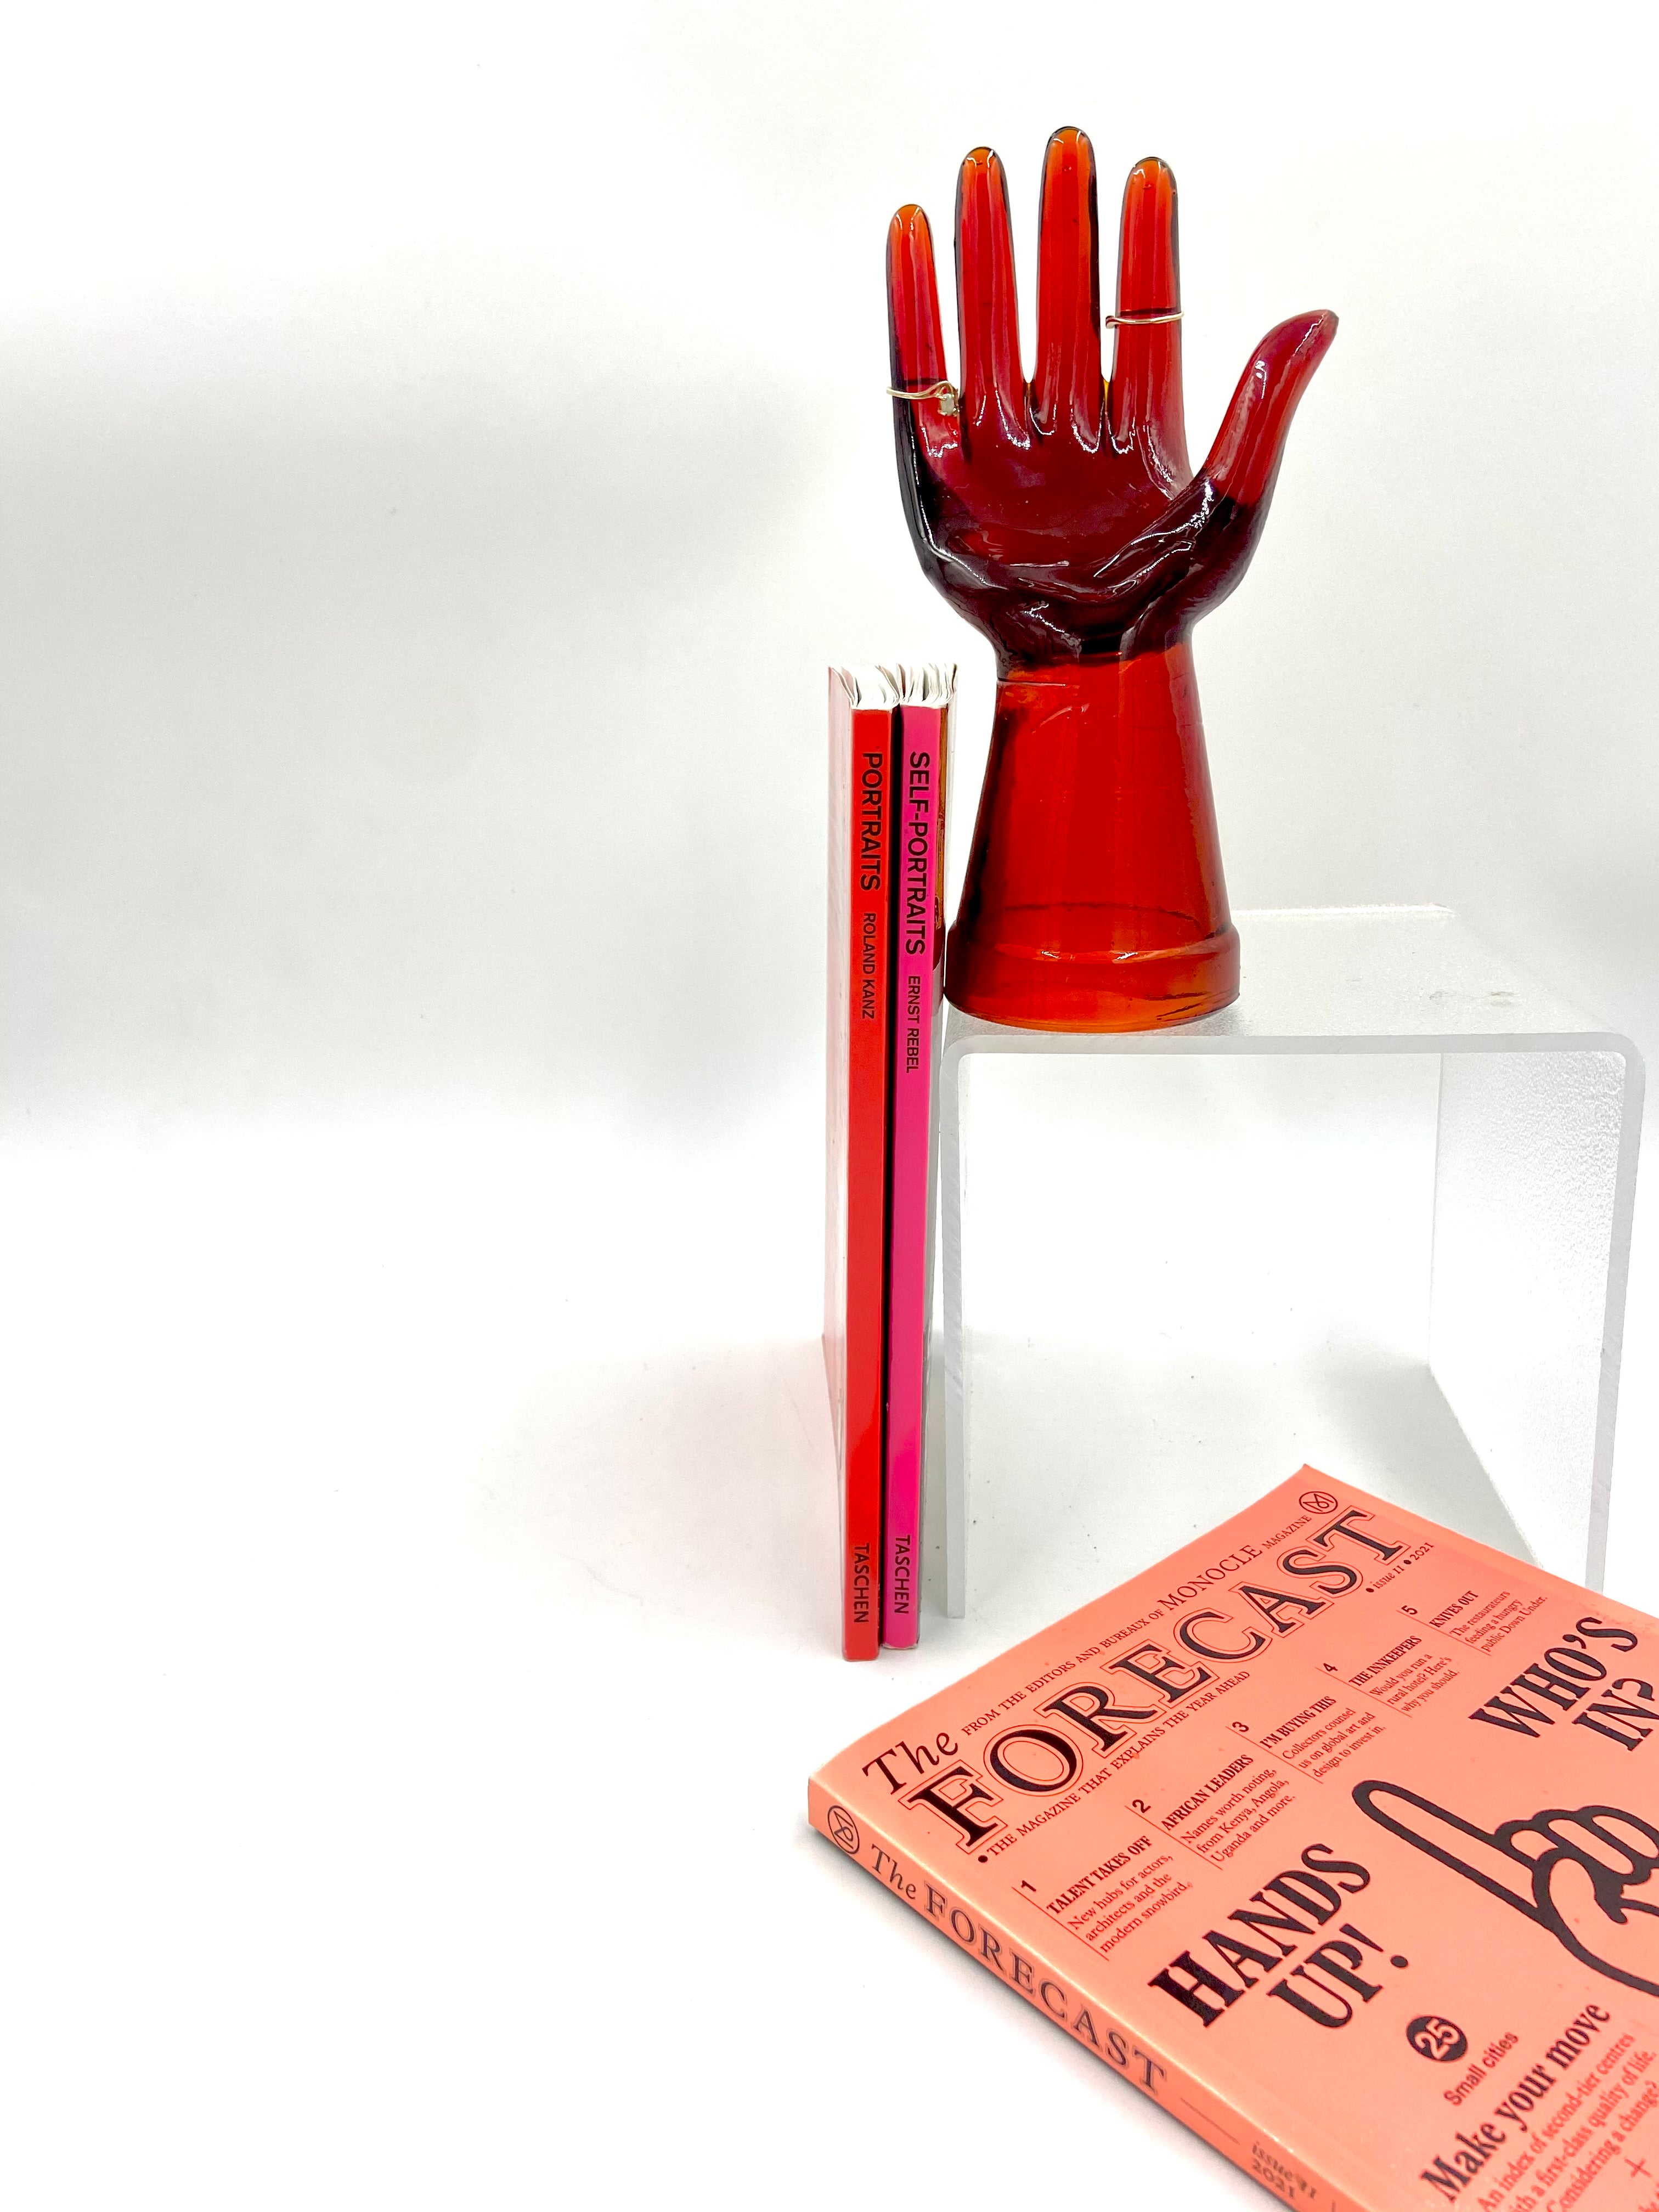 Red glass hand